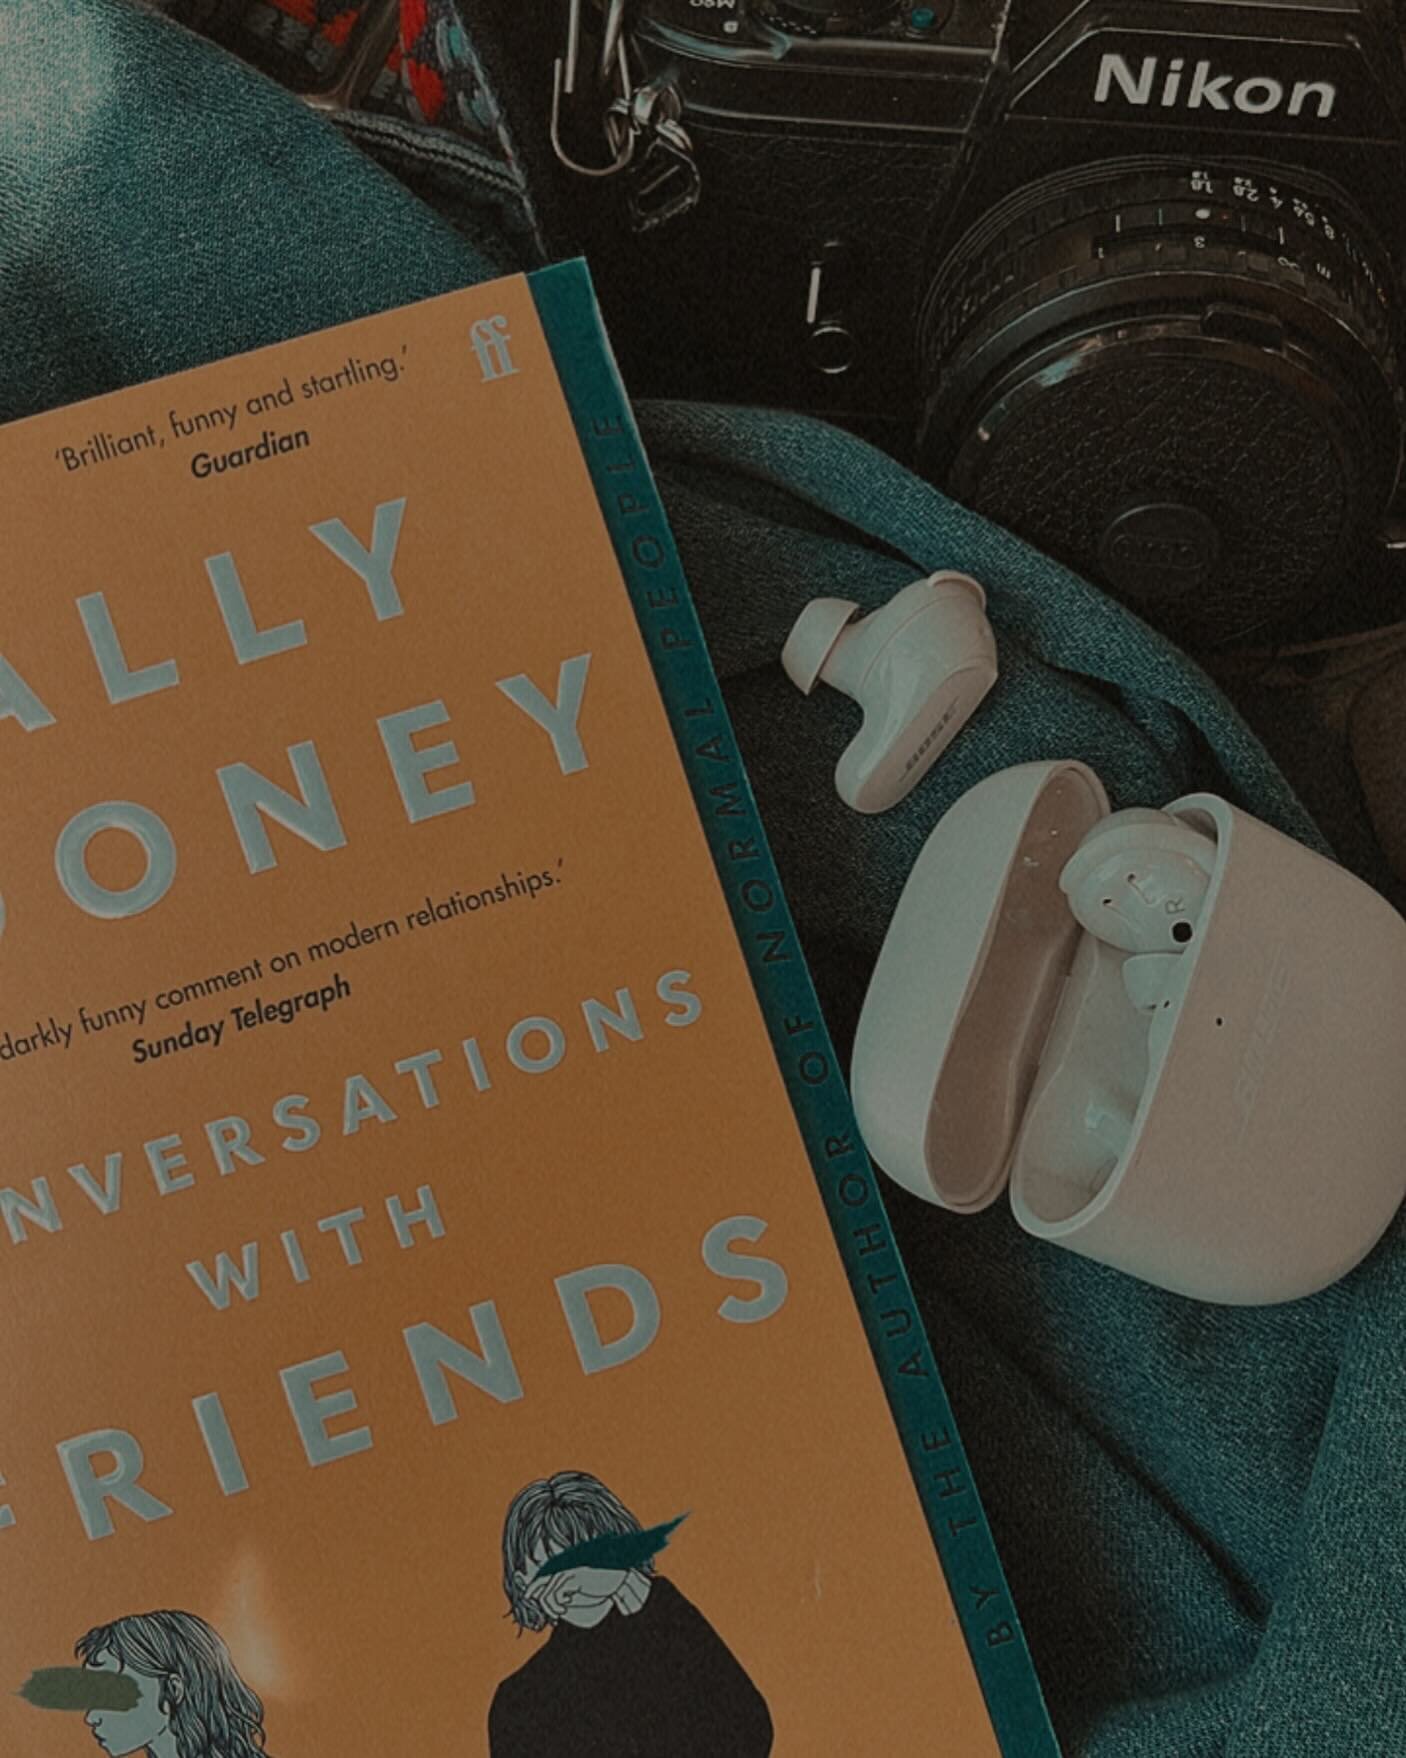 Just because I&rsquo;m in a reading slump and need suggestions on a good book. Send me the recommendations✨

#literaryjunkfood #sallyrooney #conversationswithfriends #booksbooksbooks